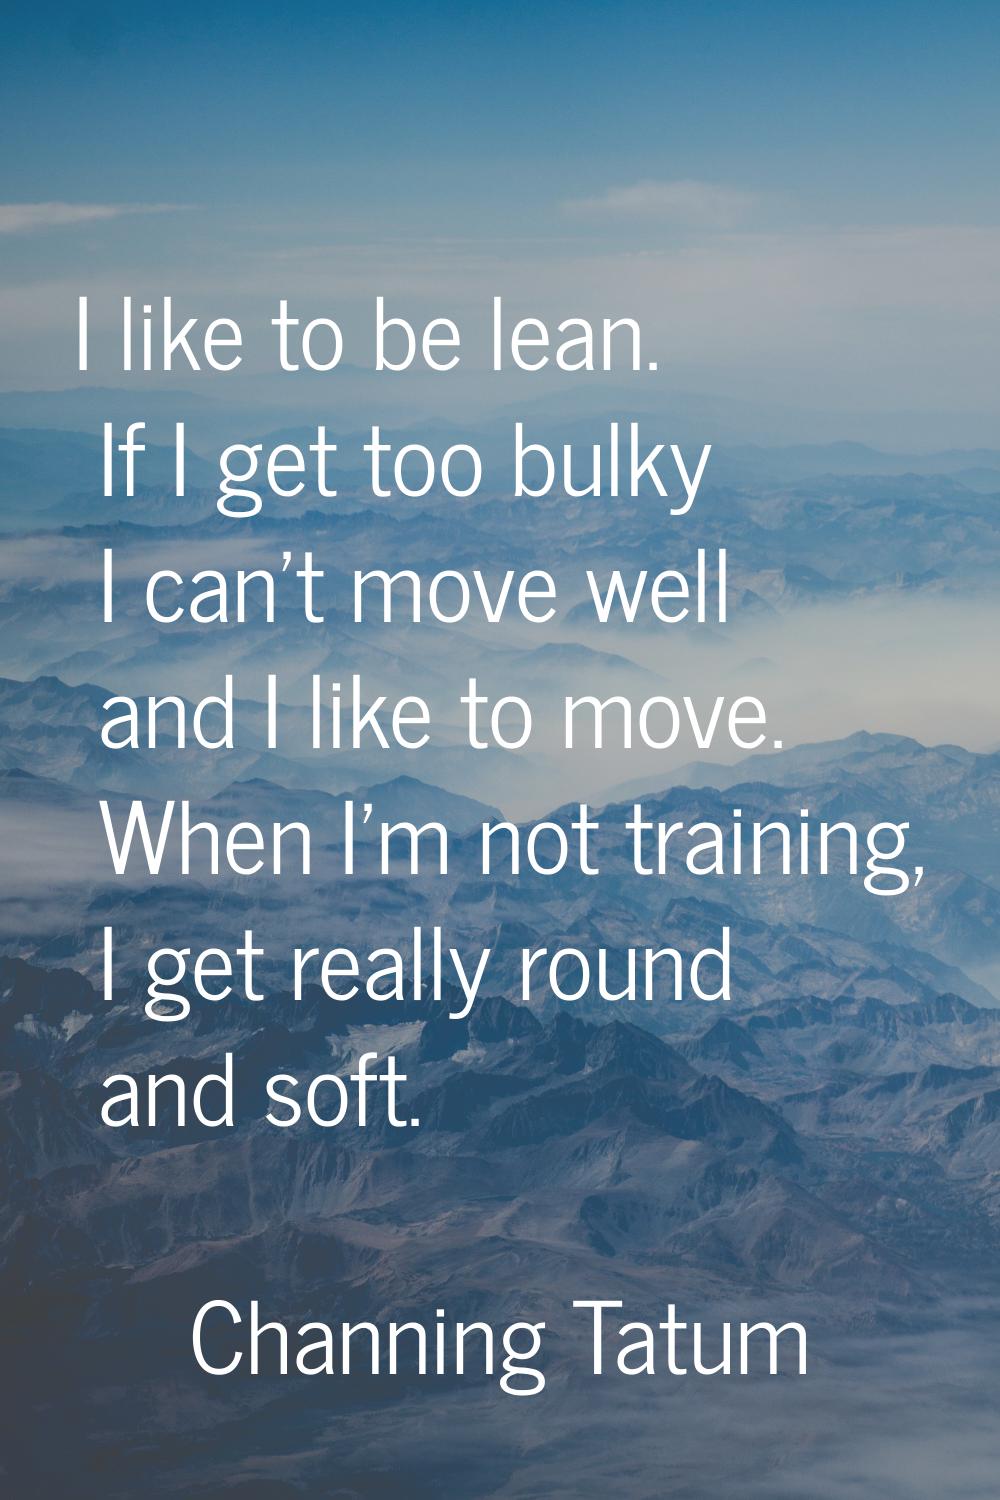 I like to be lean. If I get too bulky I can't move well and I like to move. When I'm not training, 